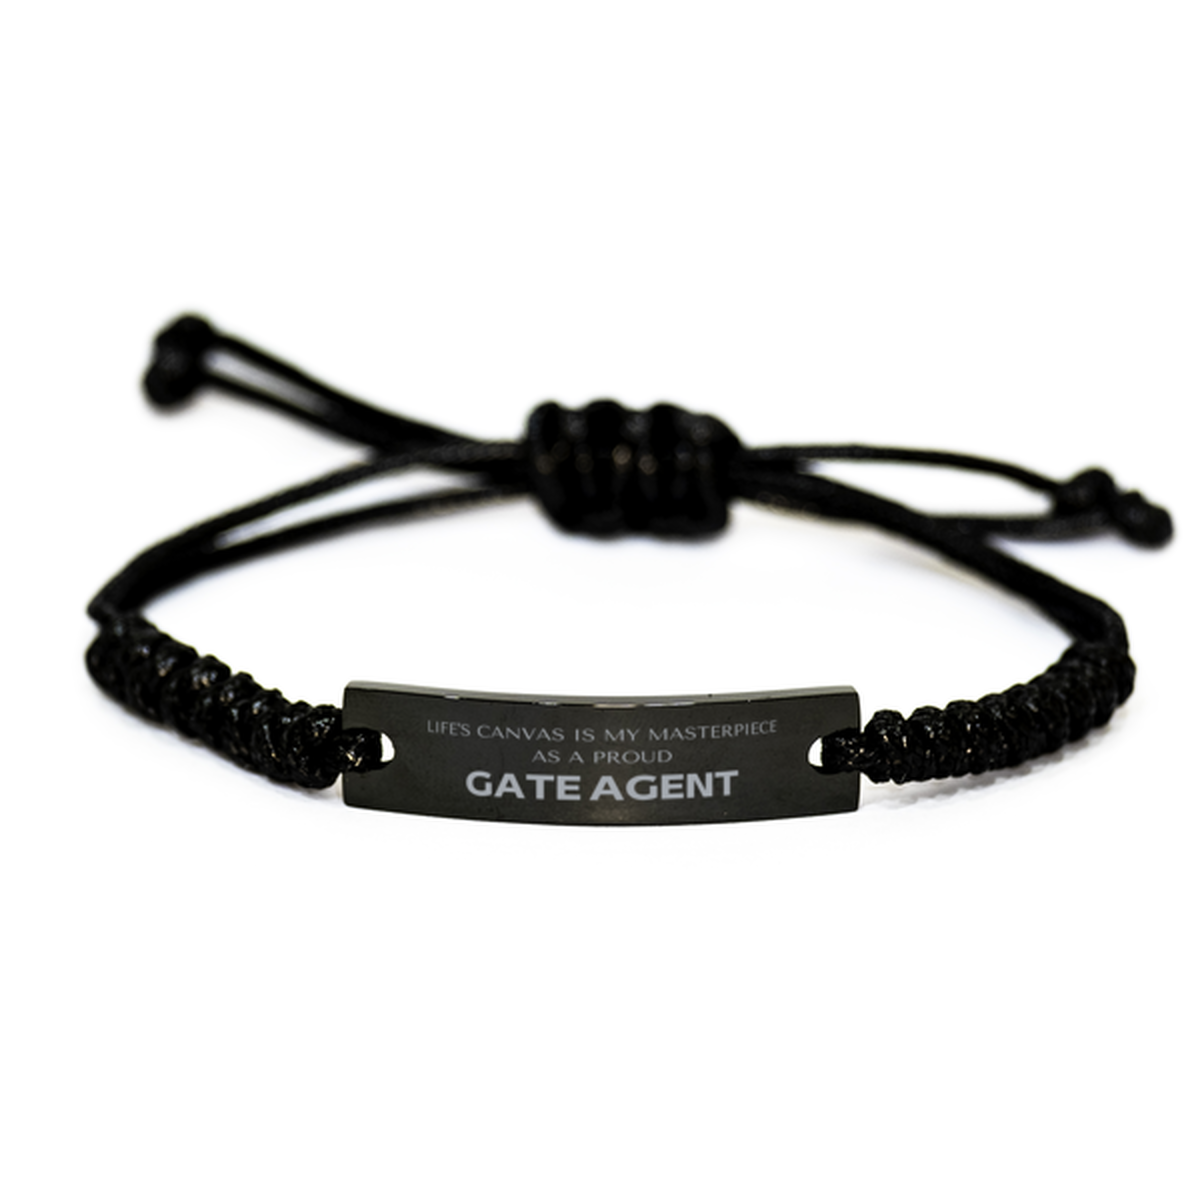 Proud Gate Agent Gifts, Life's canvas is my masterpiece, Epic Birthday Christmas Unique Black Rope Bracelet For Gate Agent, Coworkers, Men, Women, Friends